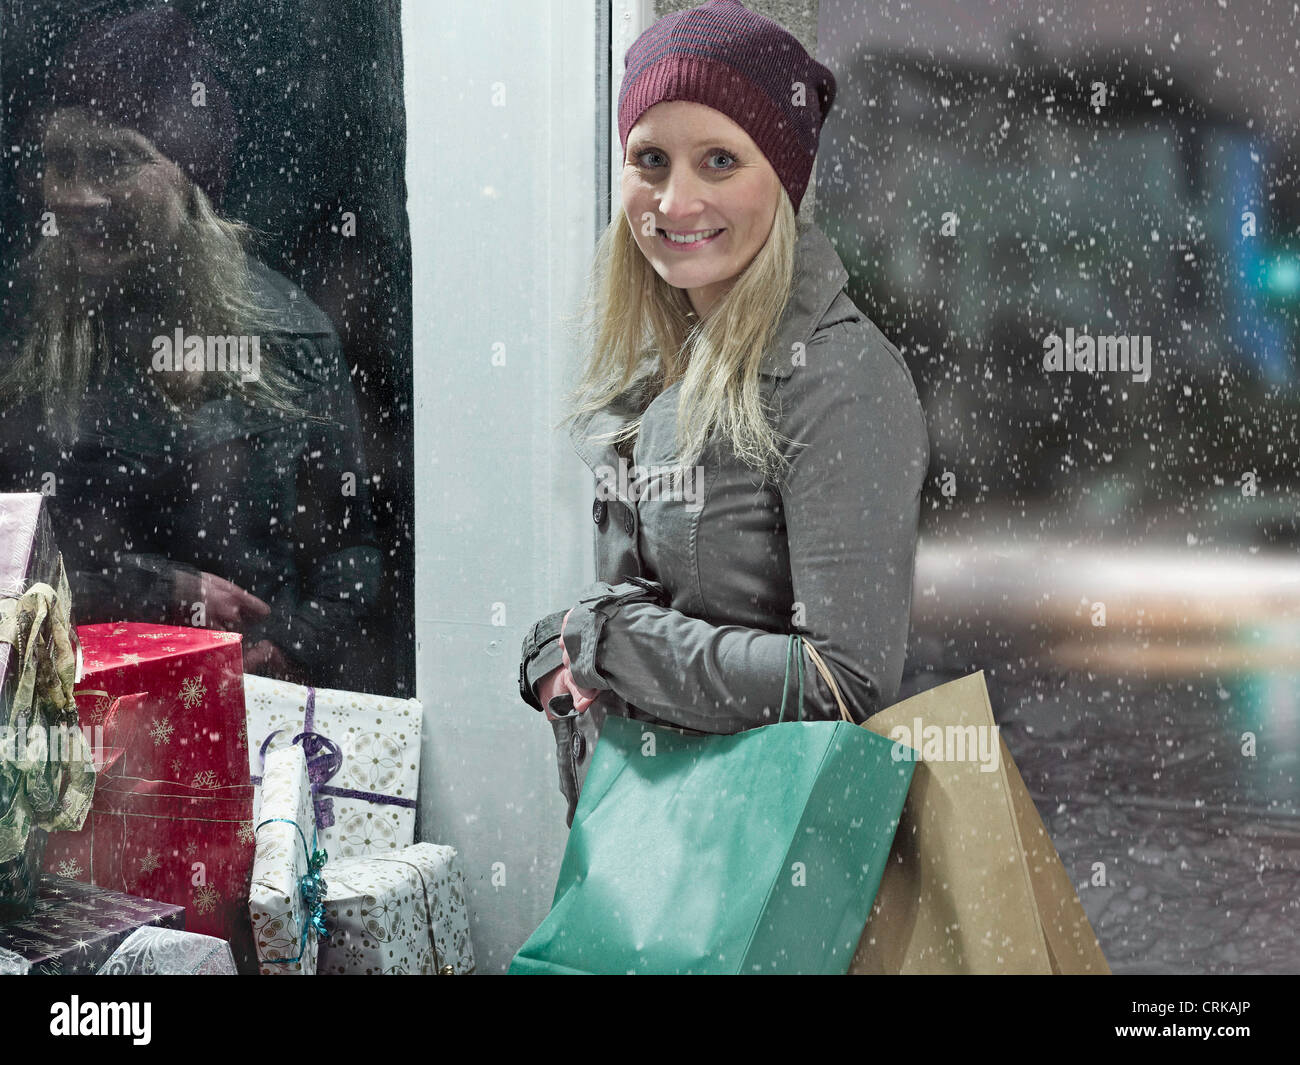 Woman carrying shopping bags in snow Banque D'Images